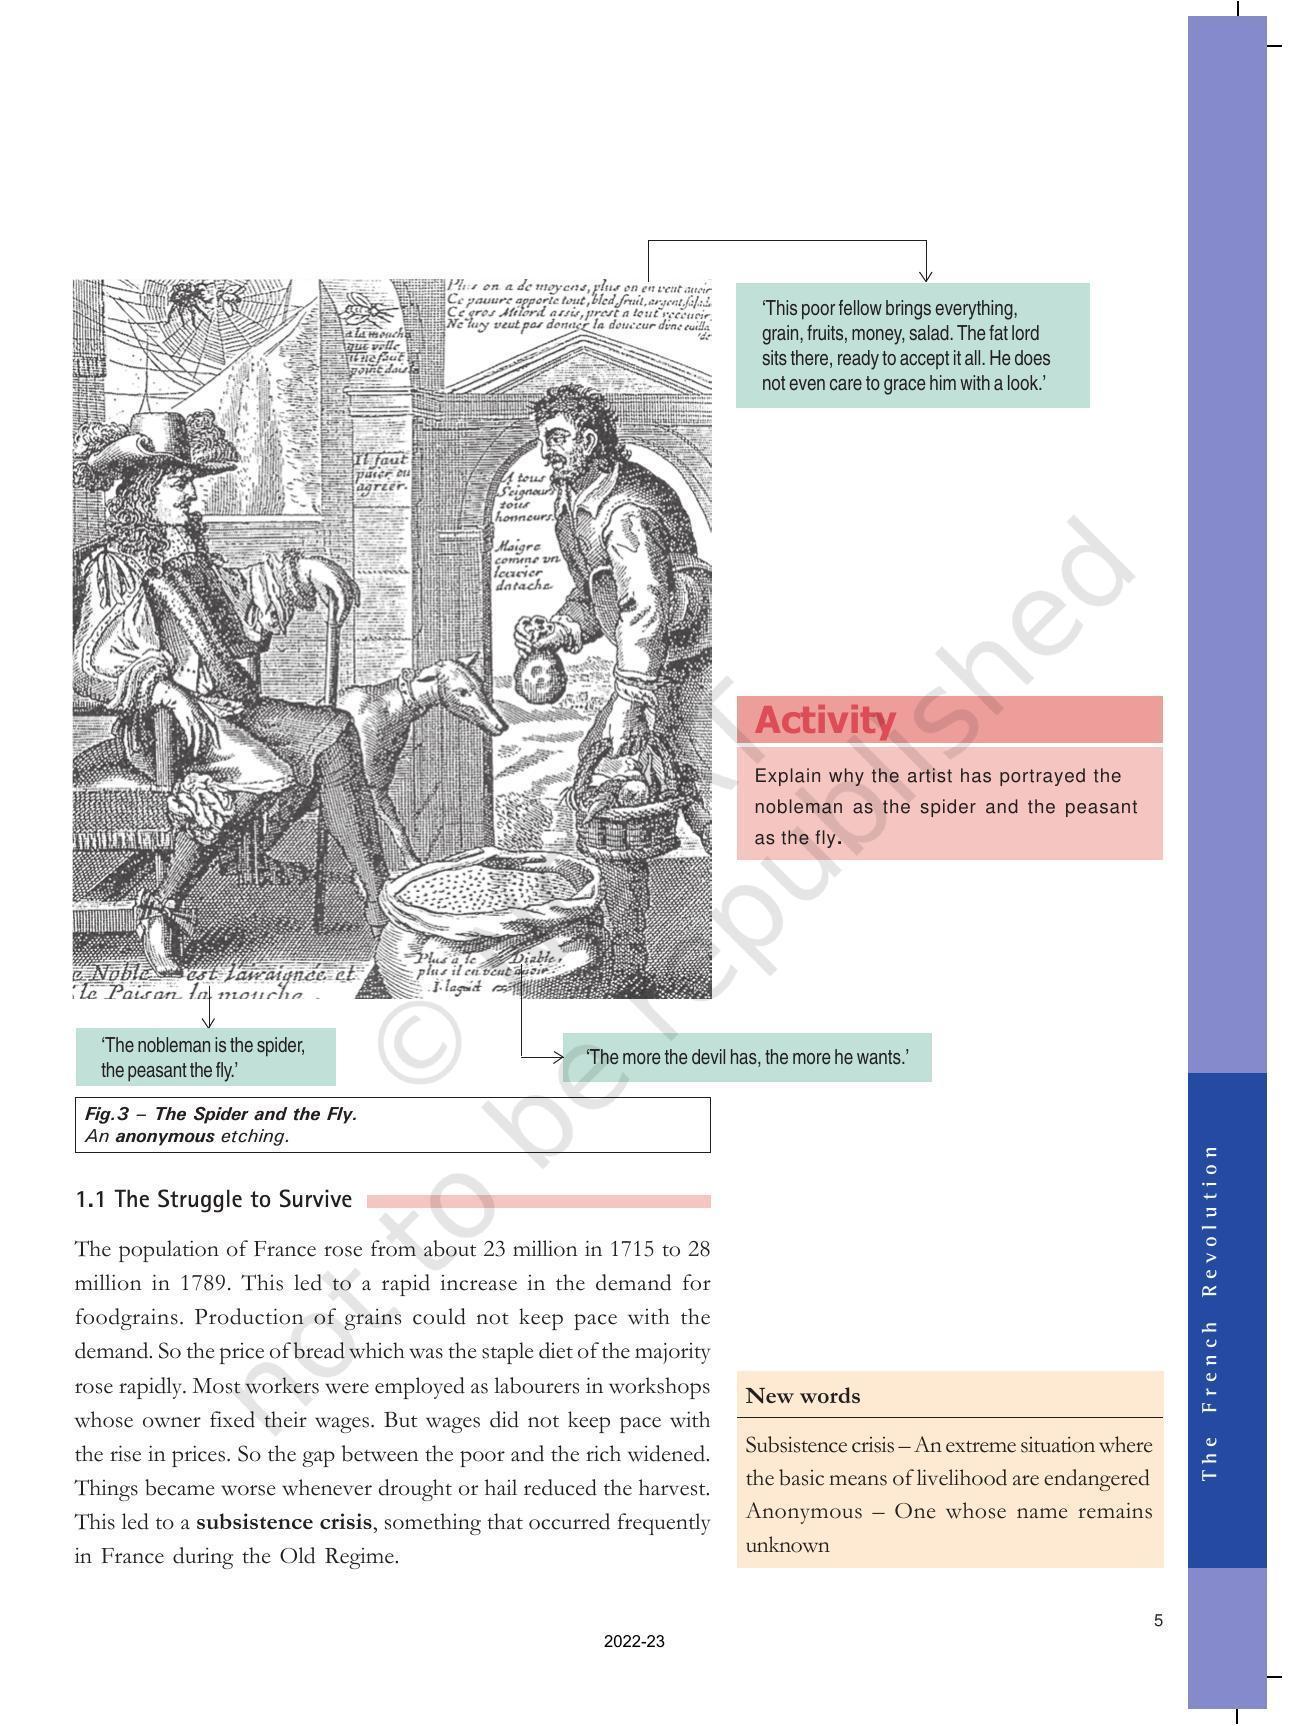 NCERT Book for Class 9 History Chapter 1 The French Revolution - Page 5